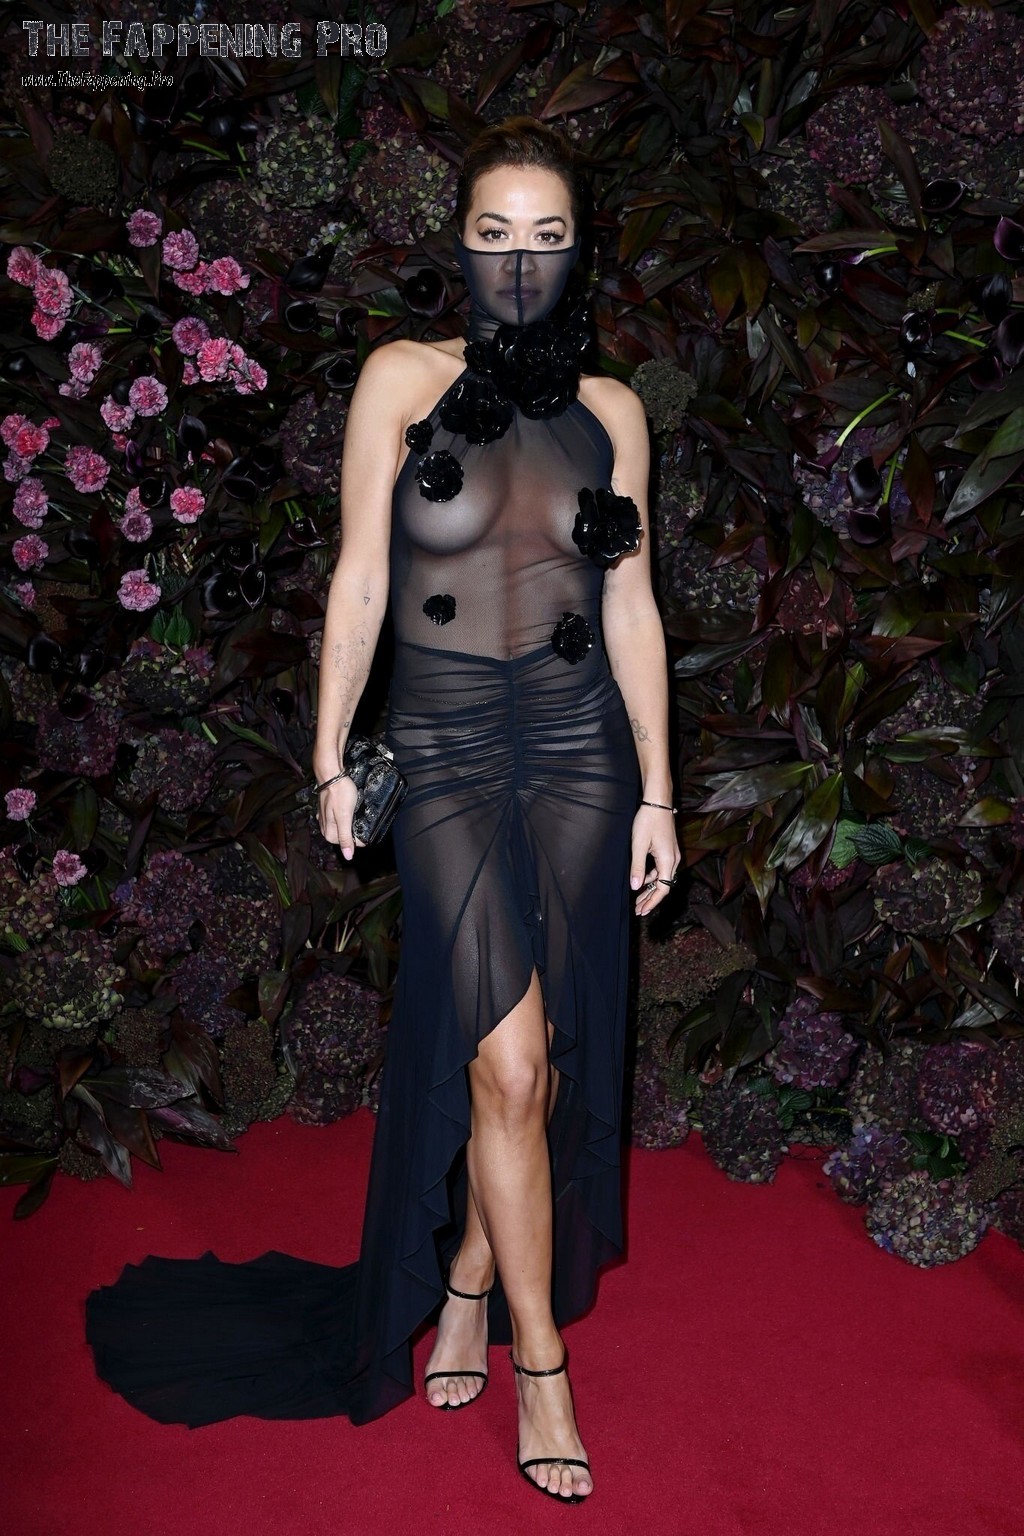 At the British Vogues 2023 Forces For Change Party in London, Rita Ora made a jaw-dropping entrance in a completely see-through dress, leaving nothing to the imagination. Despite the designer's intentions to cover her bare chest with decorative flower buds, her nude tits were on full display. To add to the scandalous look, she also wore tiny white panties that could be seen from afar. The singer certainly turned heads and sparked a frenzy at the event, making a bold statement that won't soon be forgotten.